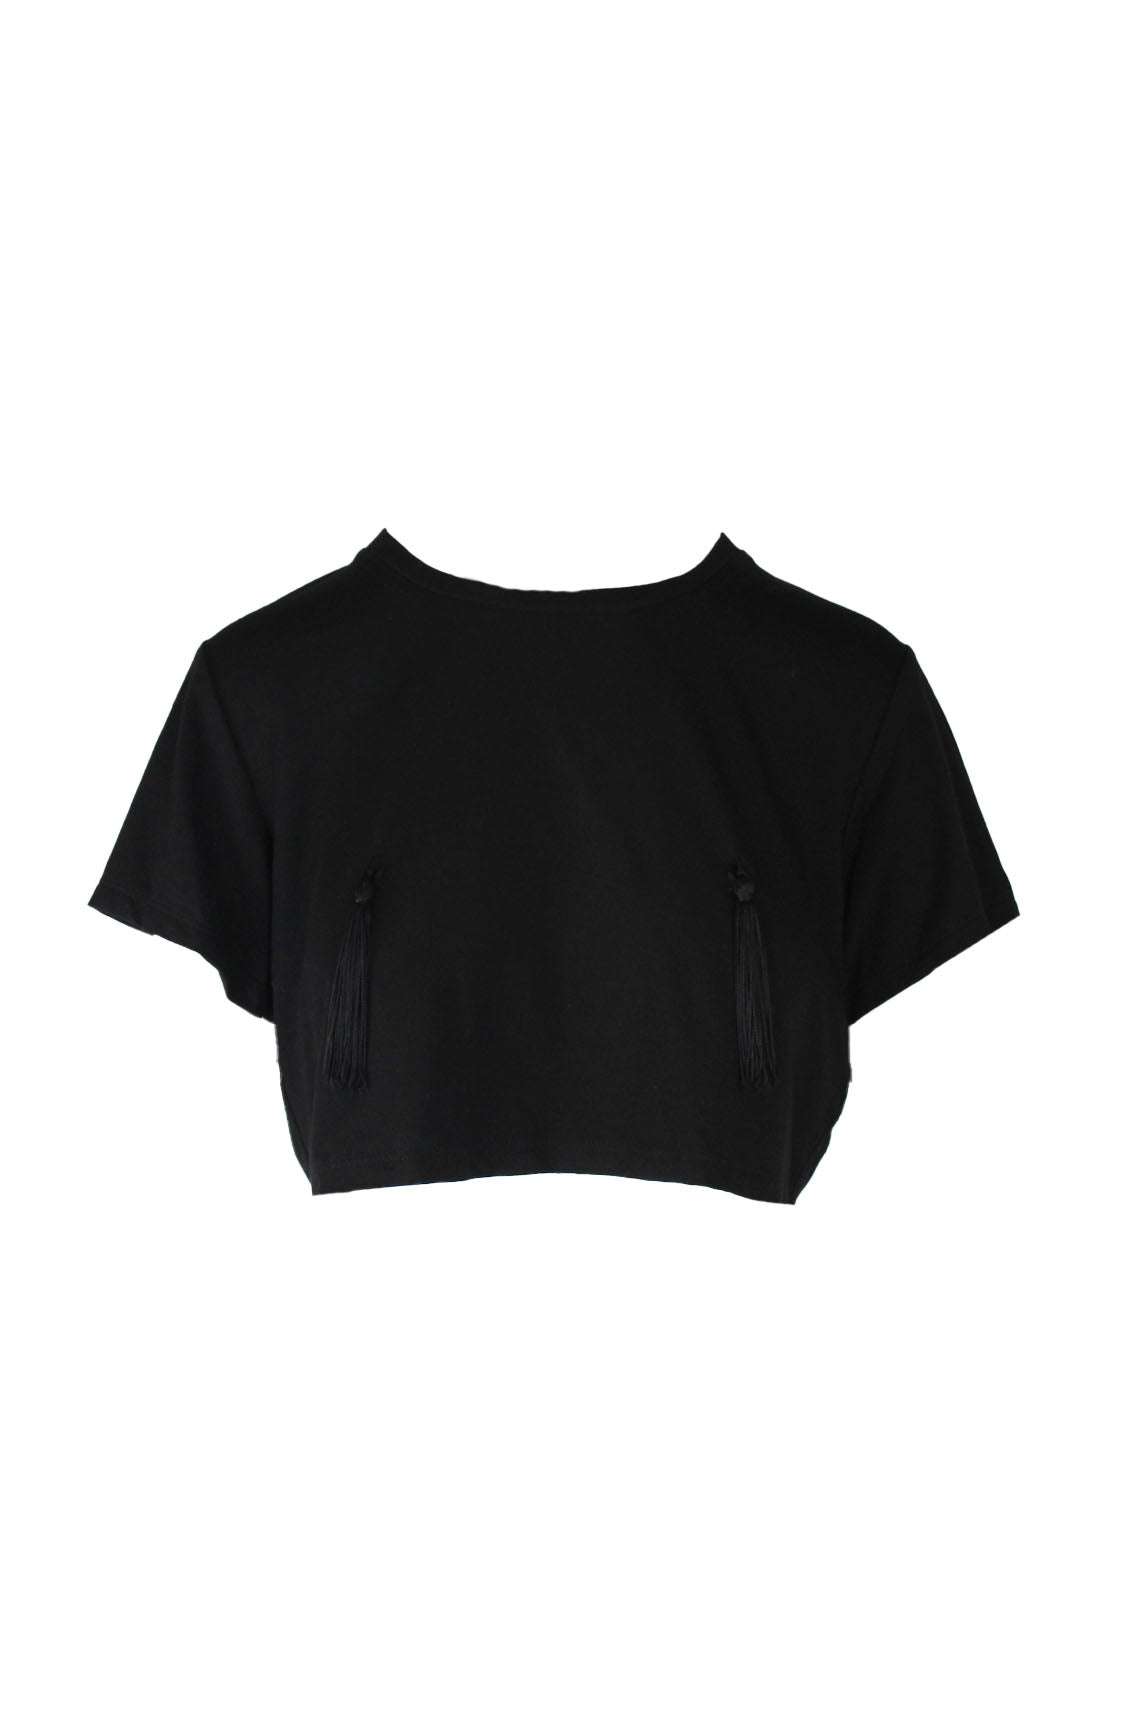 front of reformation black short sleeve crop top. features crew neckline, tassel detail at bust, double finished stitching, and pull on style. 